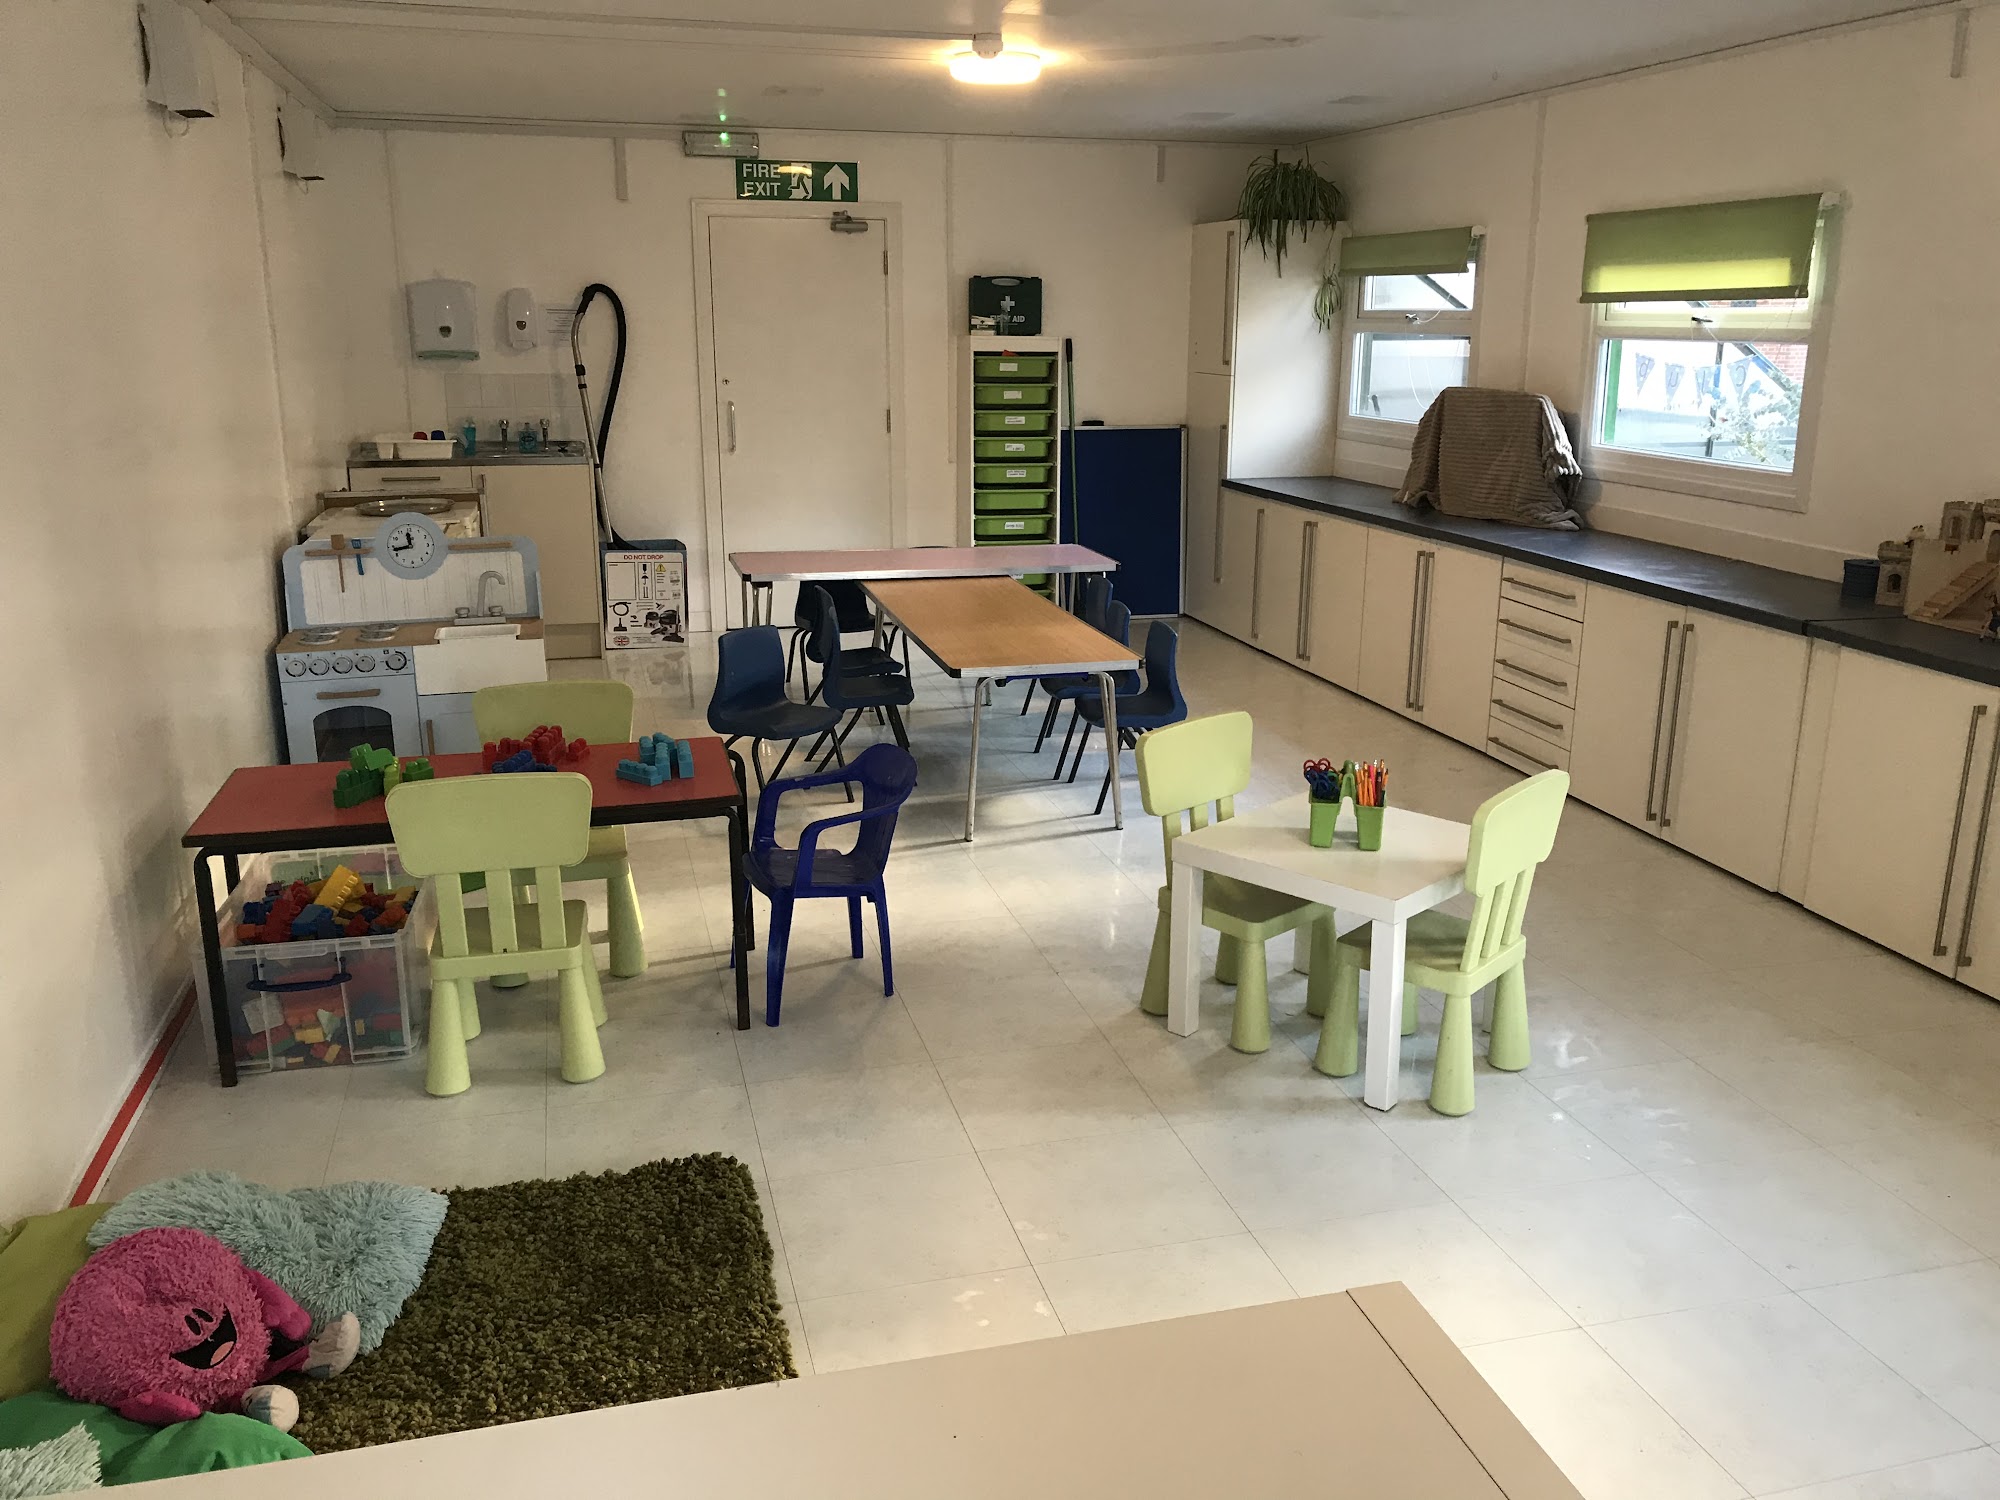 St Claire's Childcare